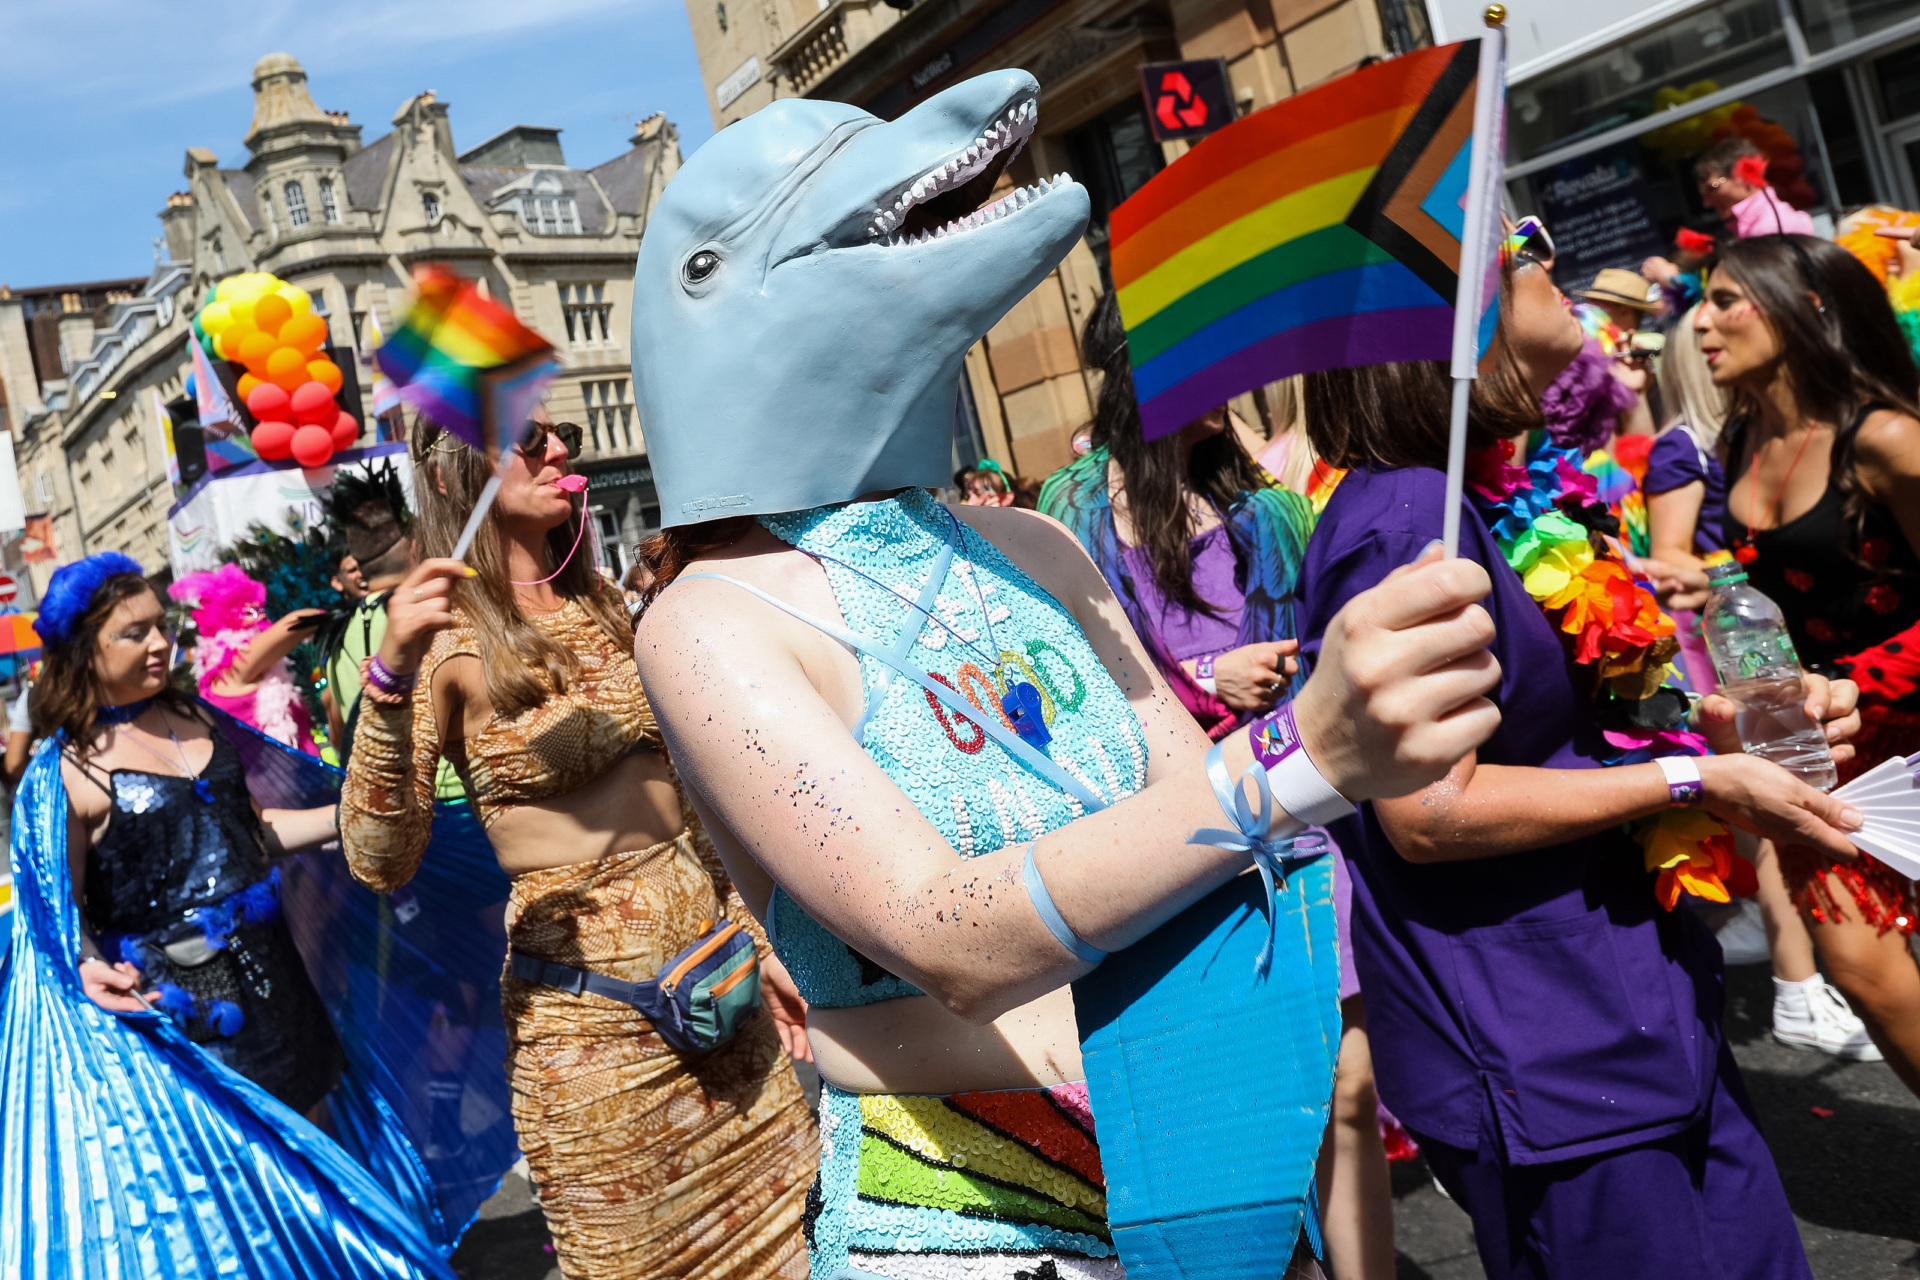 BRIGHTON, England - AUGUST 06: Festival-goers take part in the Pride LGBTQ + Community Parade - 'Love, Protest & Unity' during Brighton Pride on August 6, 2022 in Brighton, England.  (Photo by Tristan Viewings/Getty Images)